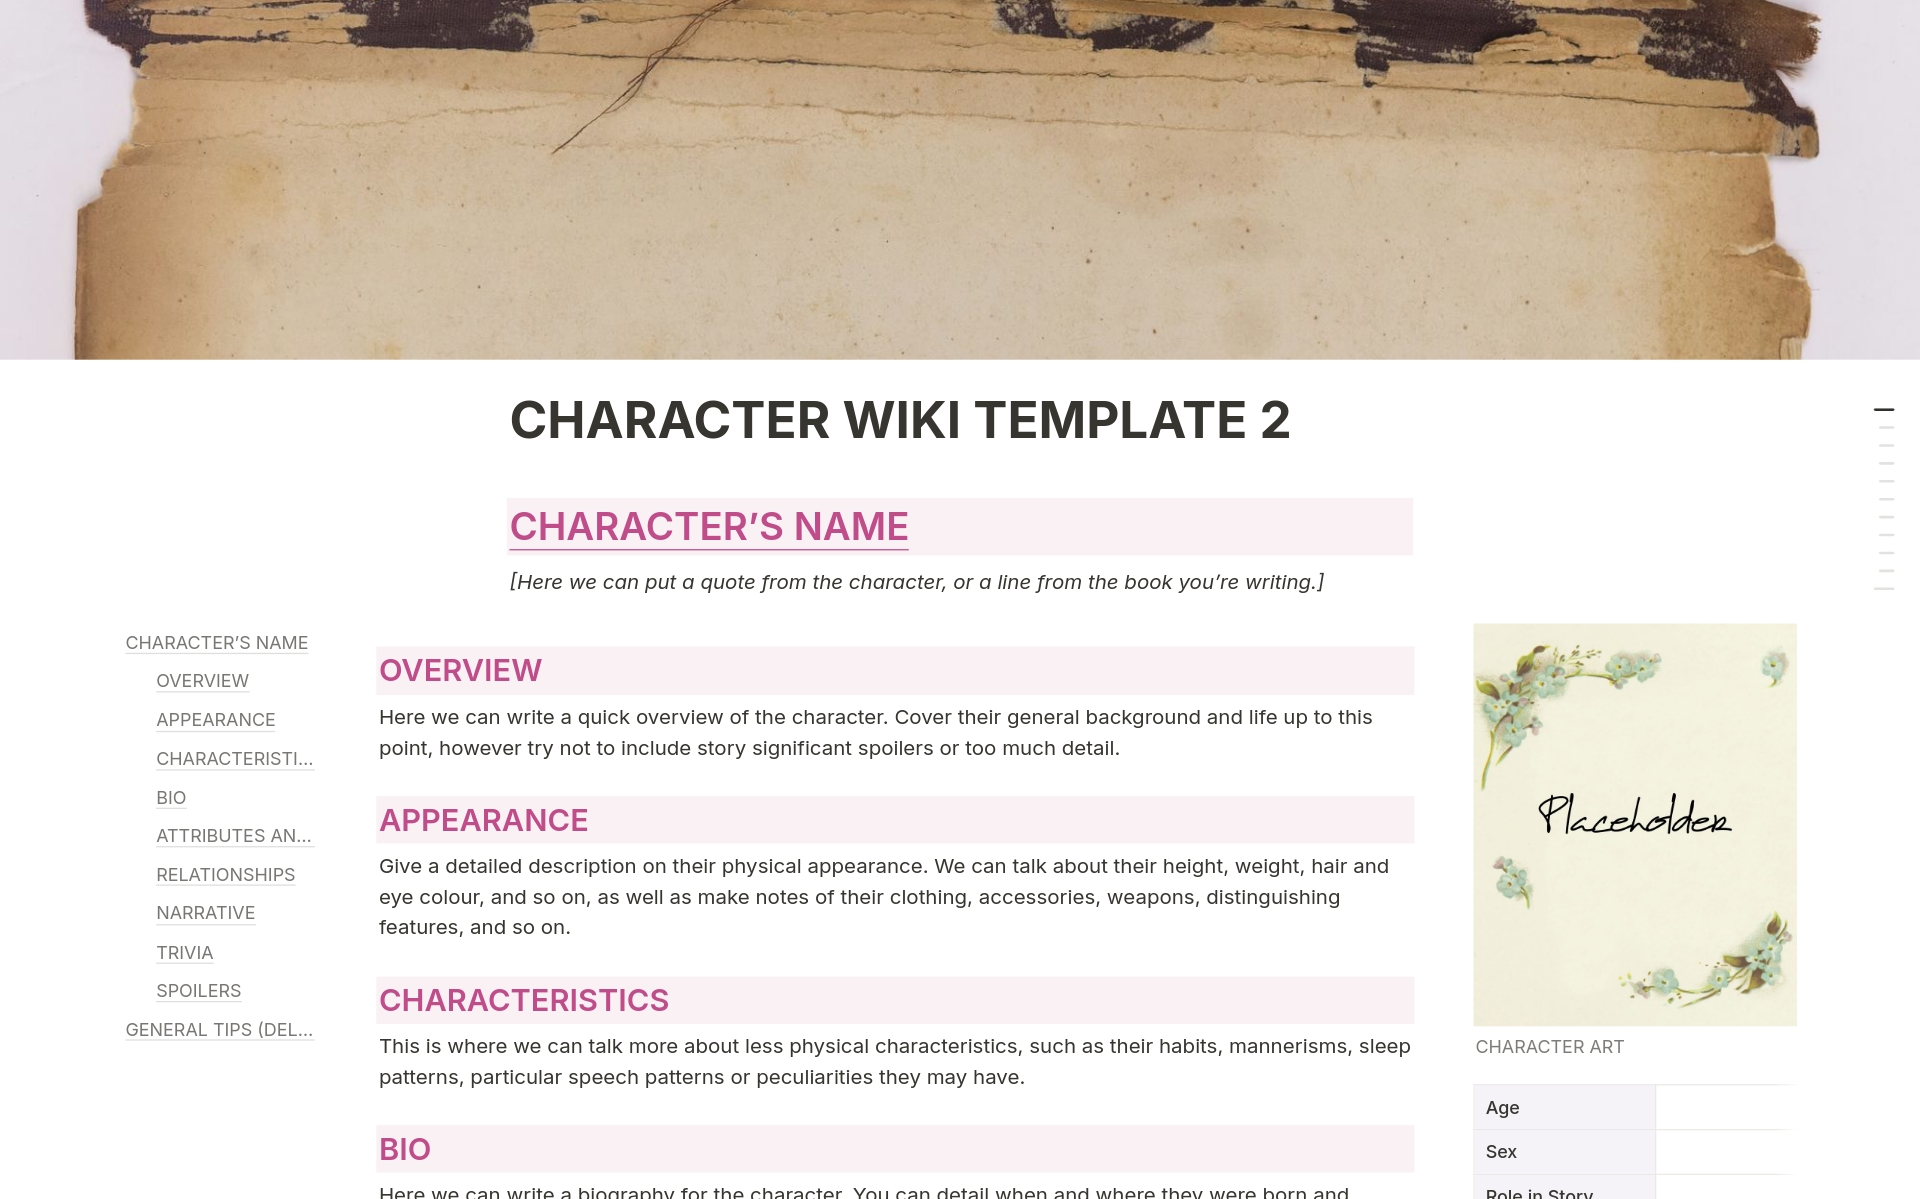 A basic template for a wiki-style character profile.